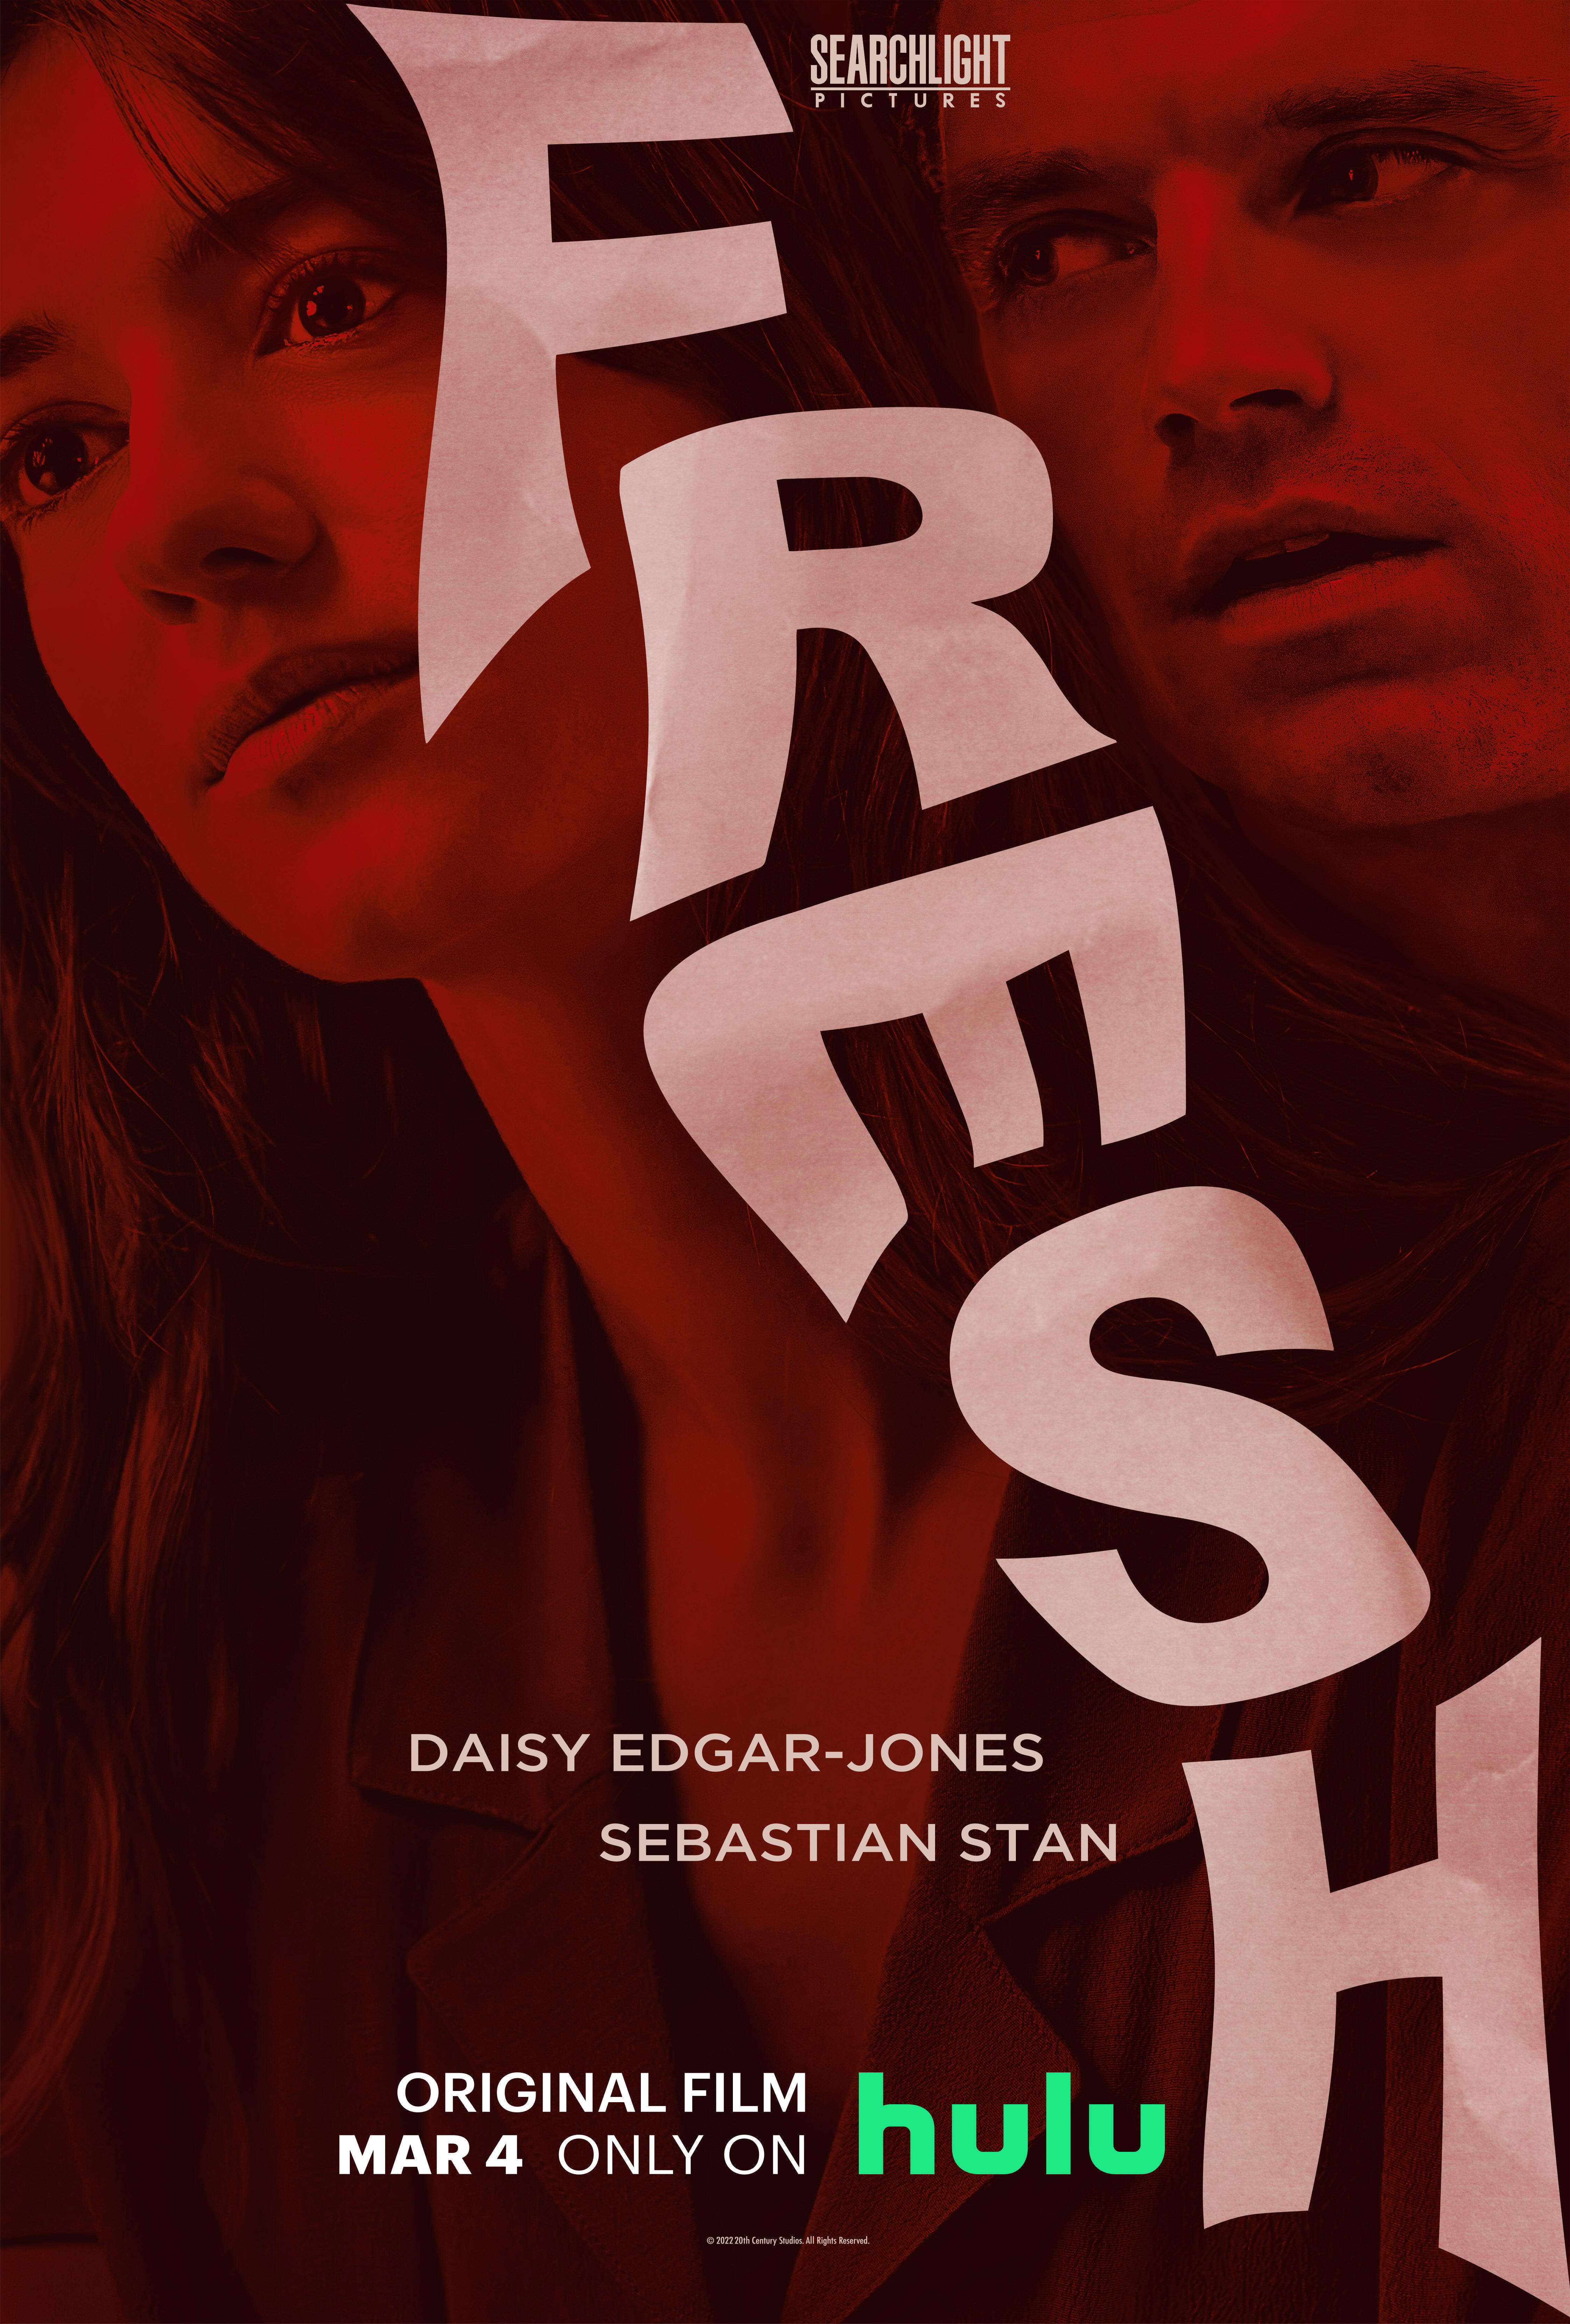 Movie Review: Fresh Will Make You Never Want To Date Again